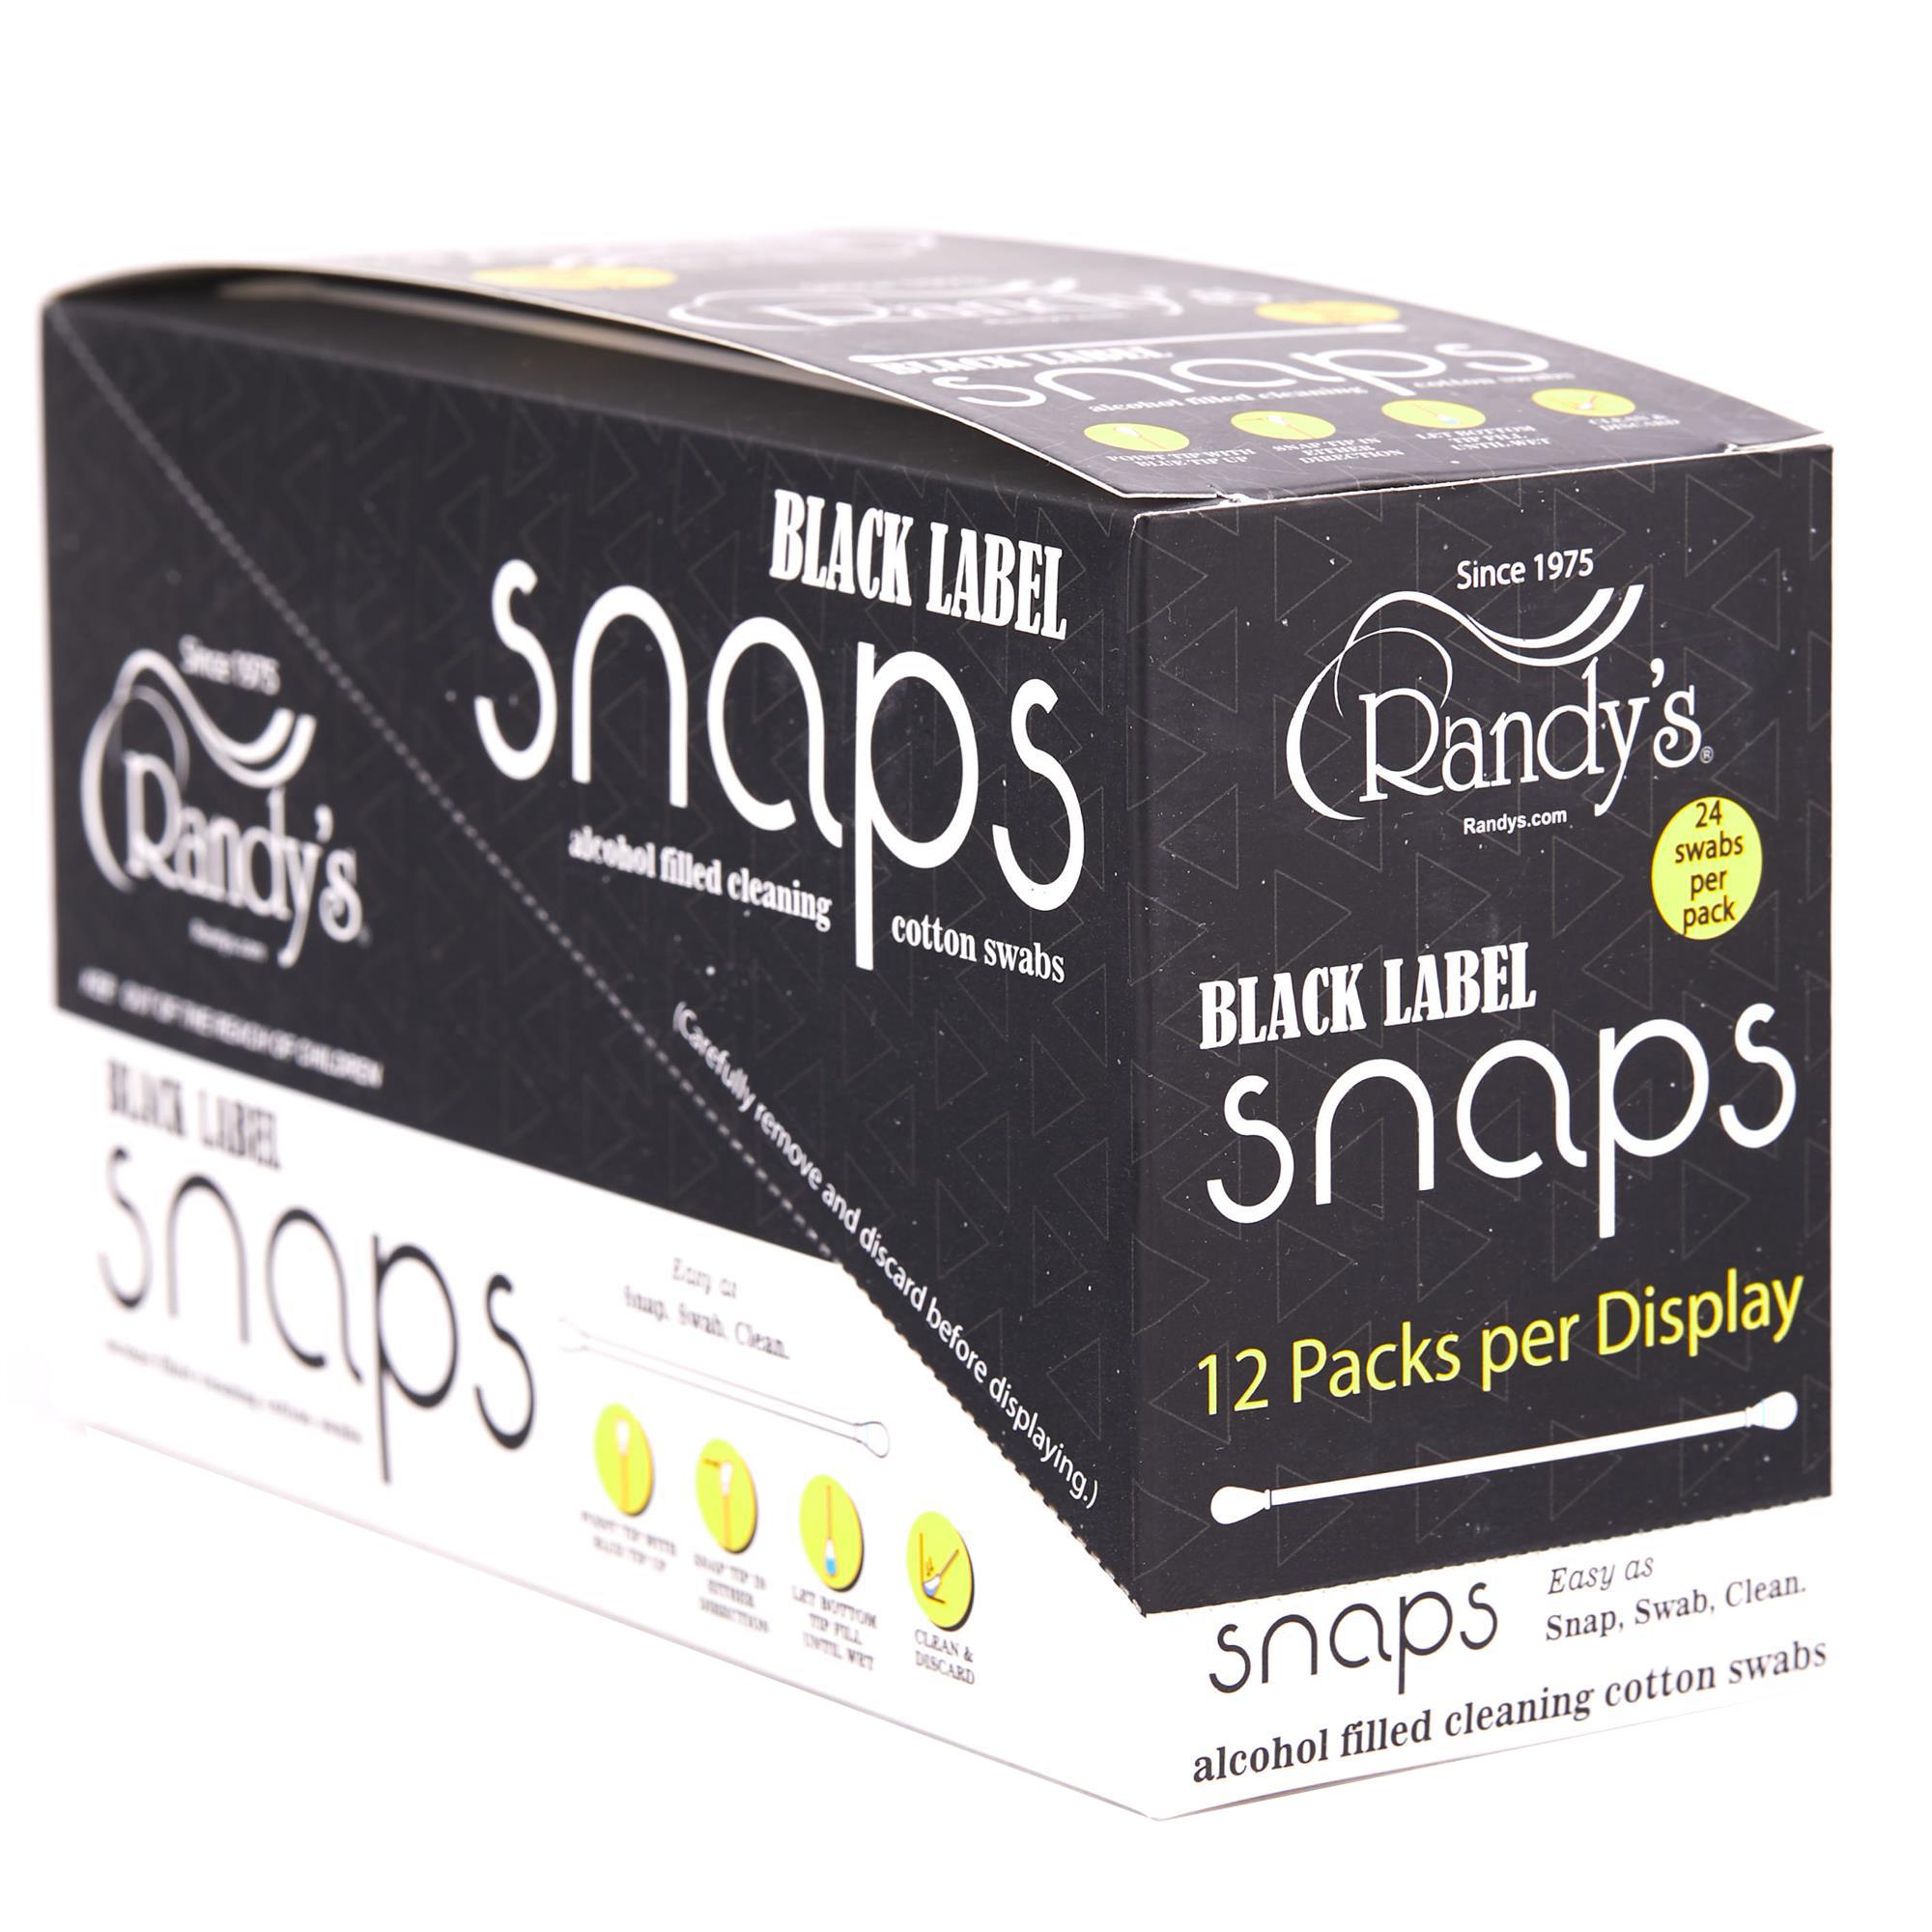 RANDY'S BLACK LABEL SNAPS ALCOHOL FILLED SWABS